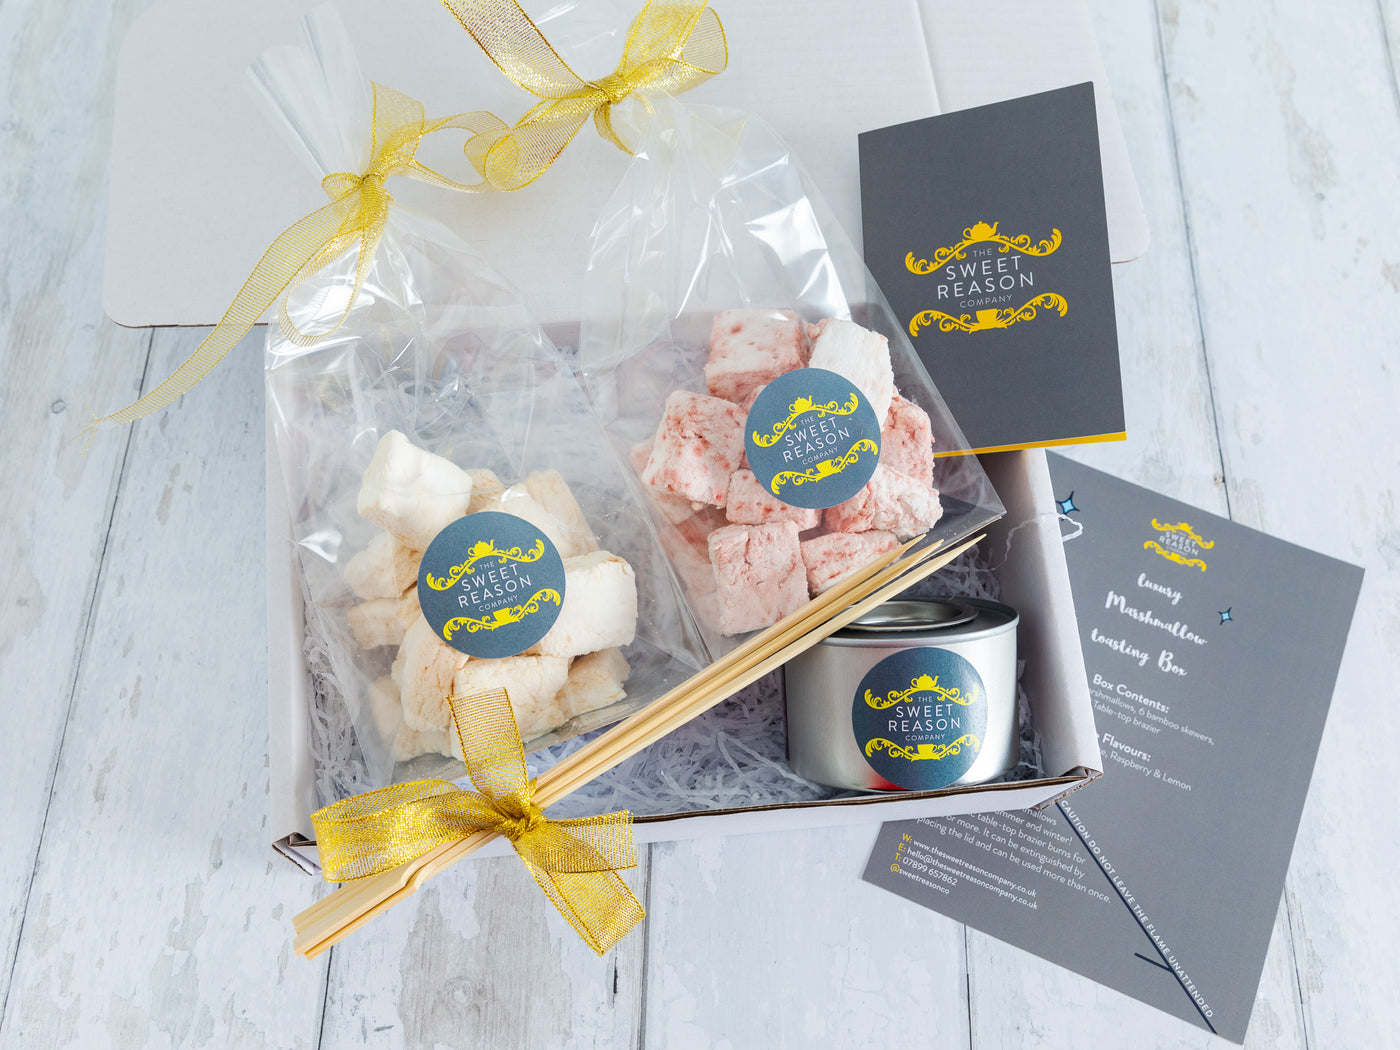 Marshmallow Toasting Kit in a presentation box with a gift card